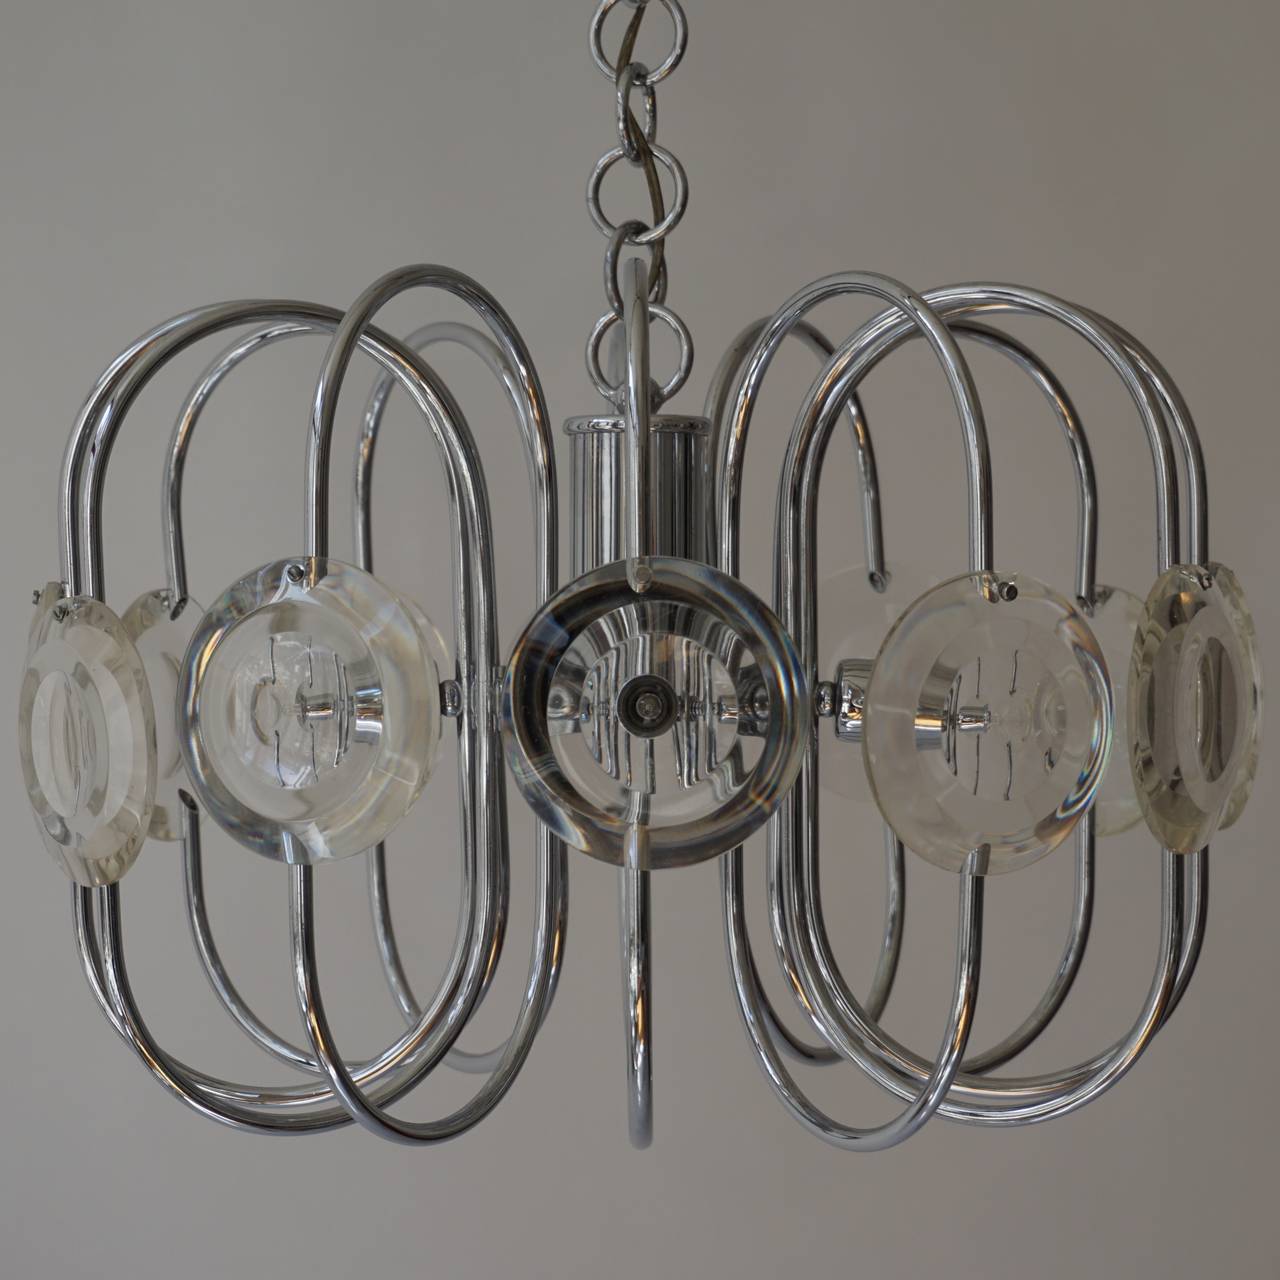 Italian chandelier in glass by Gaetano Sciolari.

Ceiling lamp designed by Gaetano Sciolari in the 1960s, made of tubular chromed steel and glass with four light points.